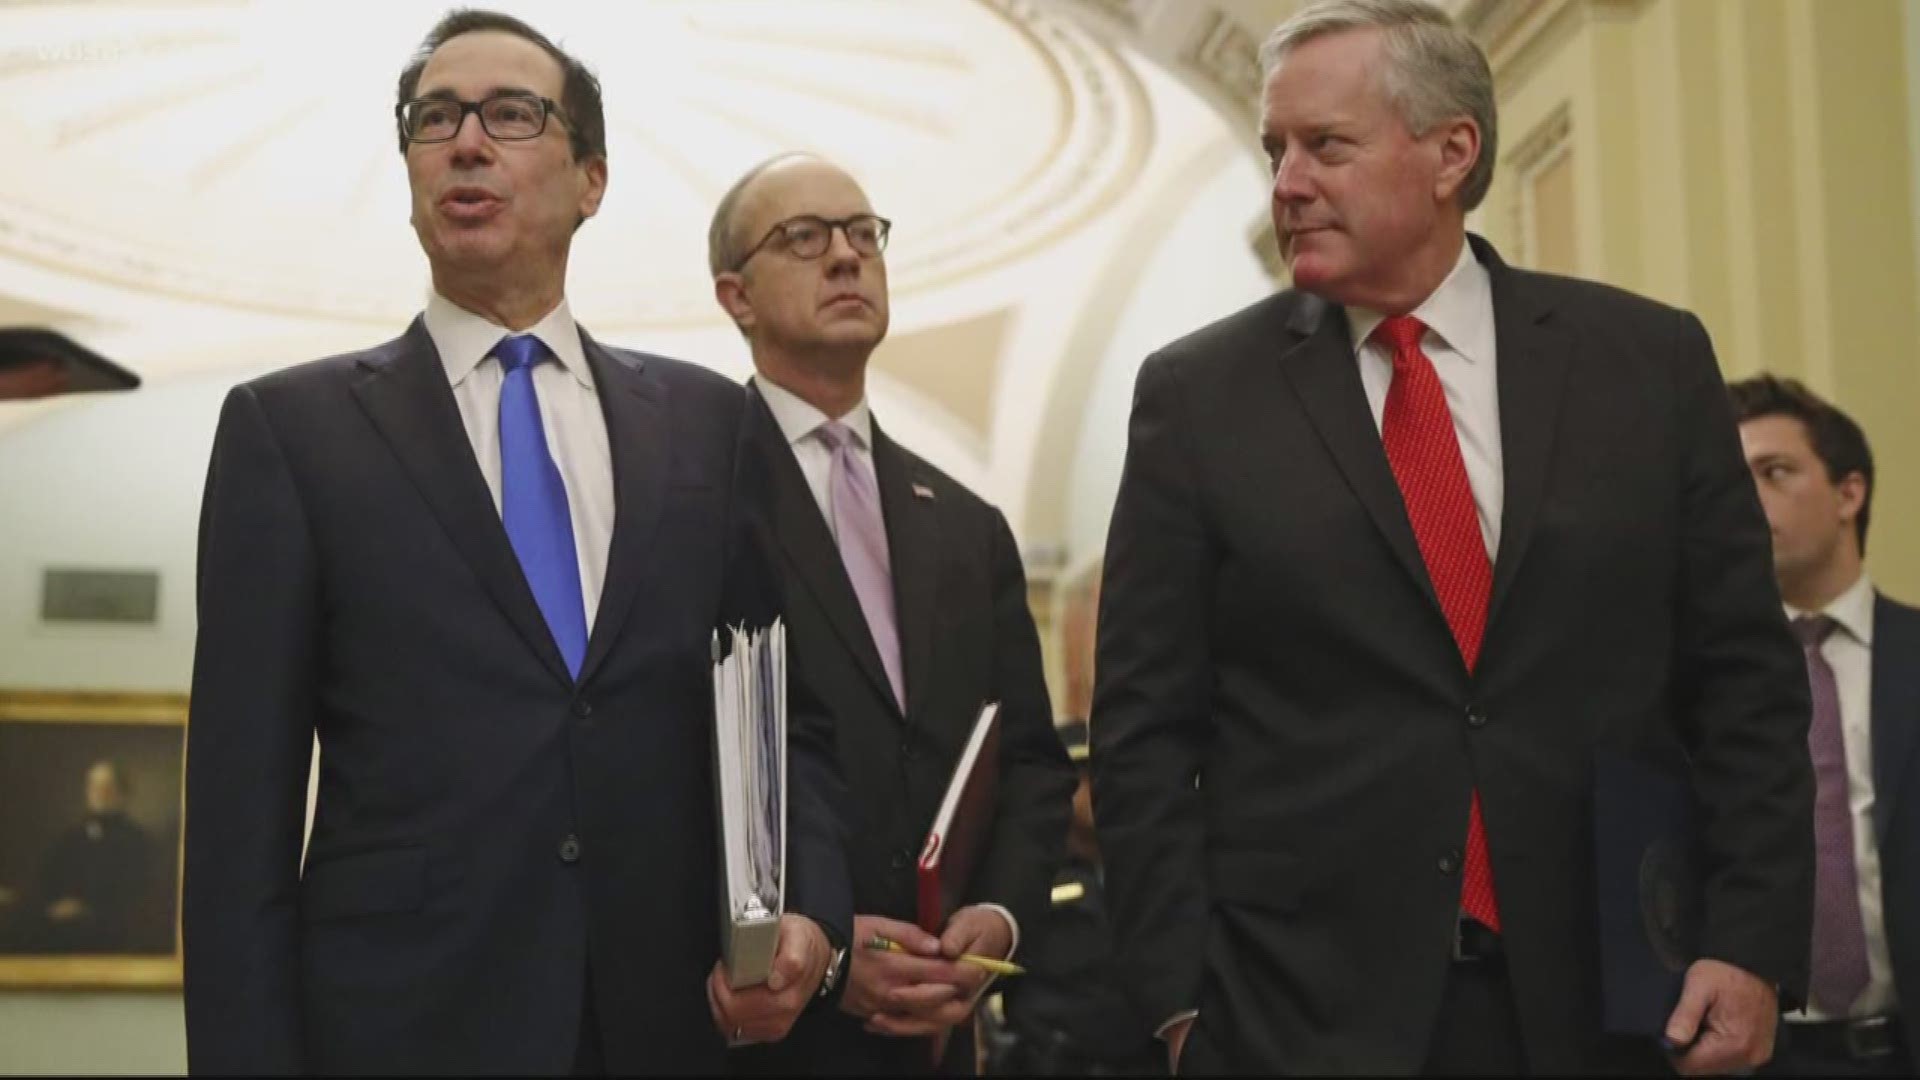 Senators are still on the job trying to reach a deal on a stimulus bill to bring some financial relief to Americans.